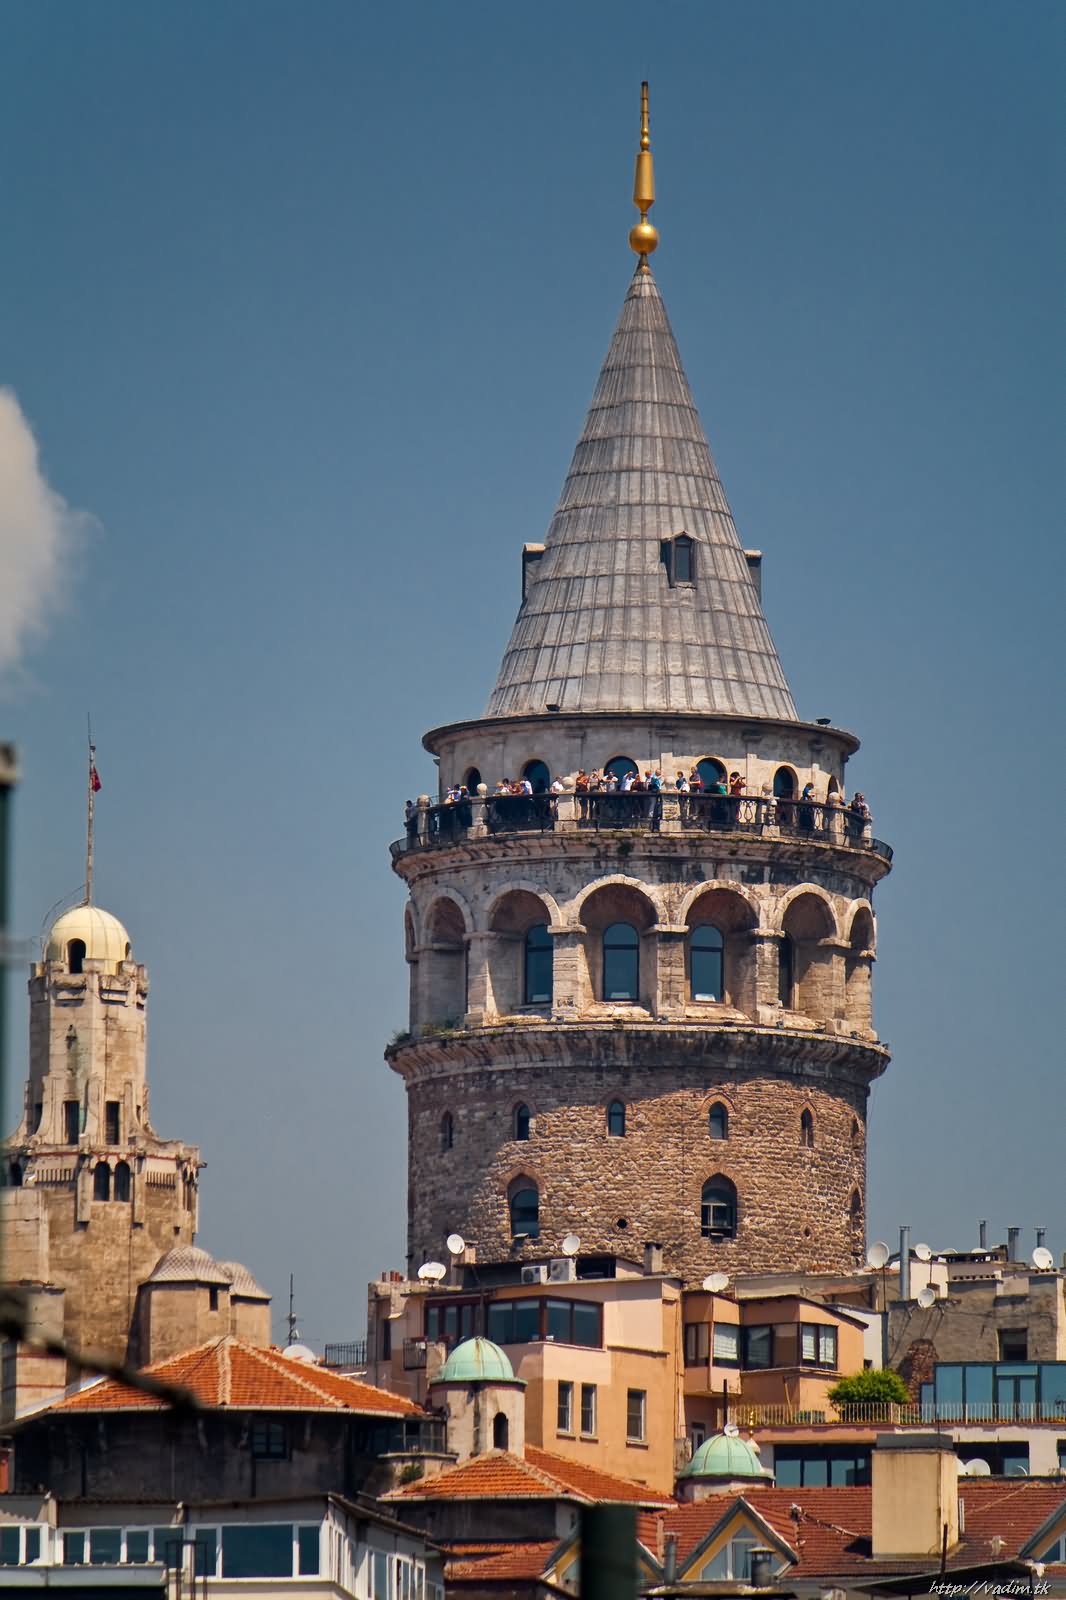 The Galata Tower In Istanbul